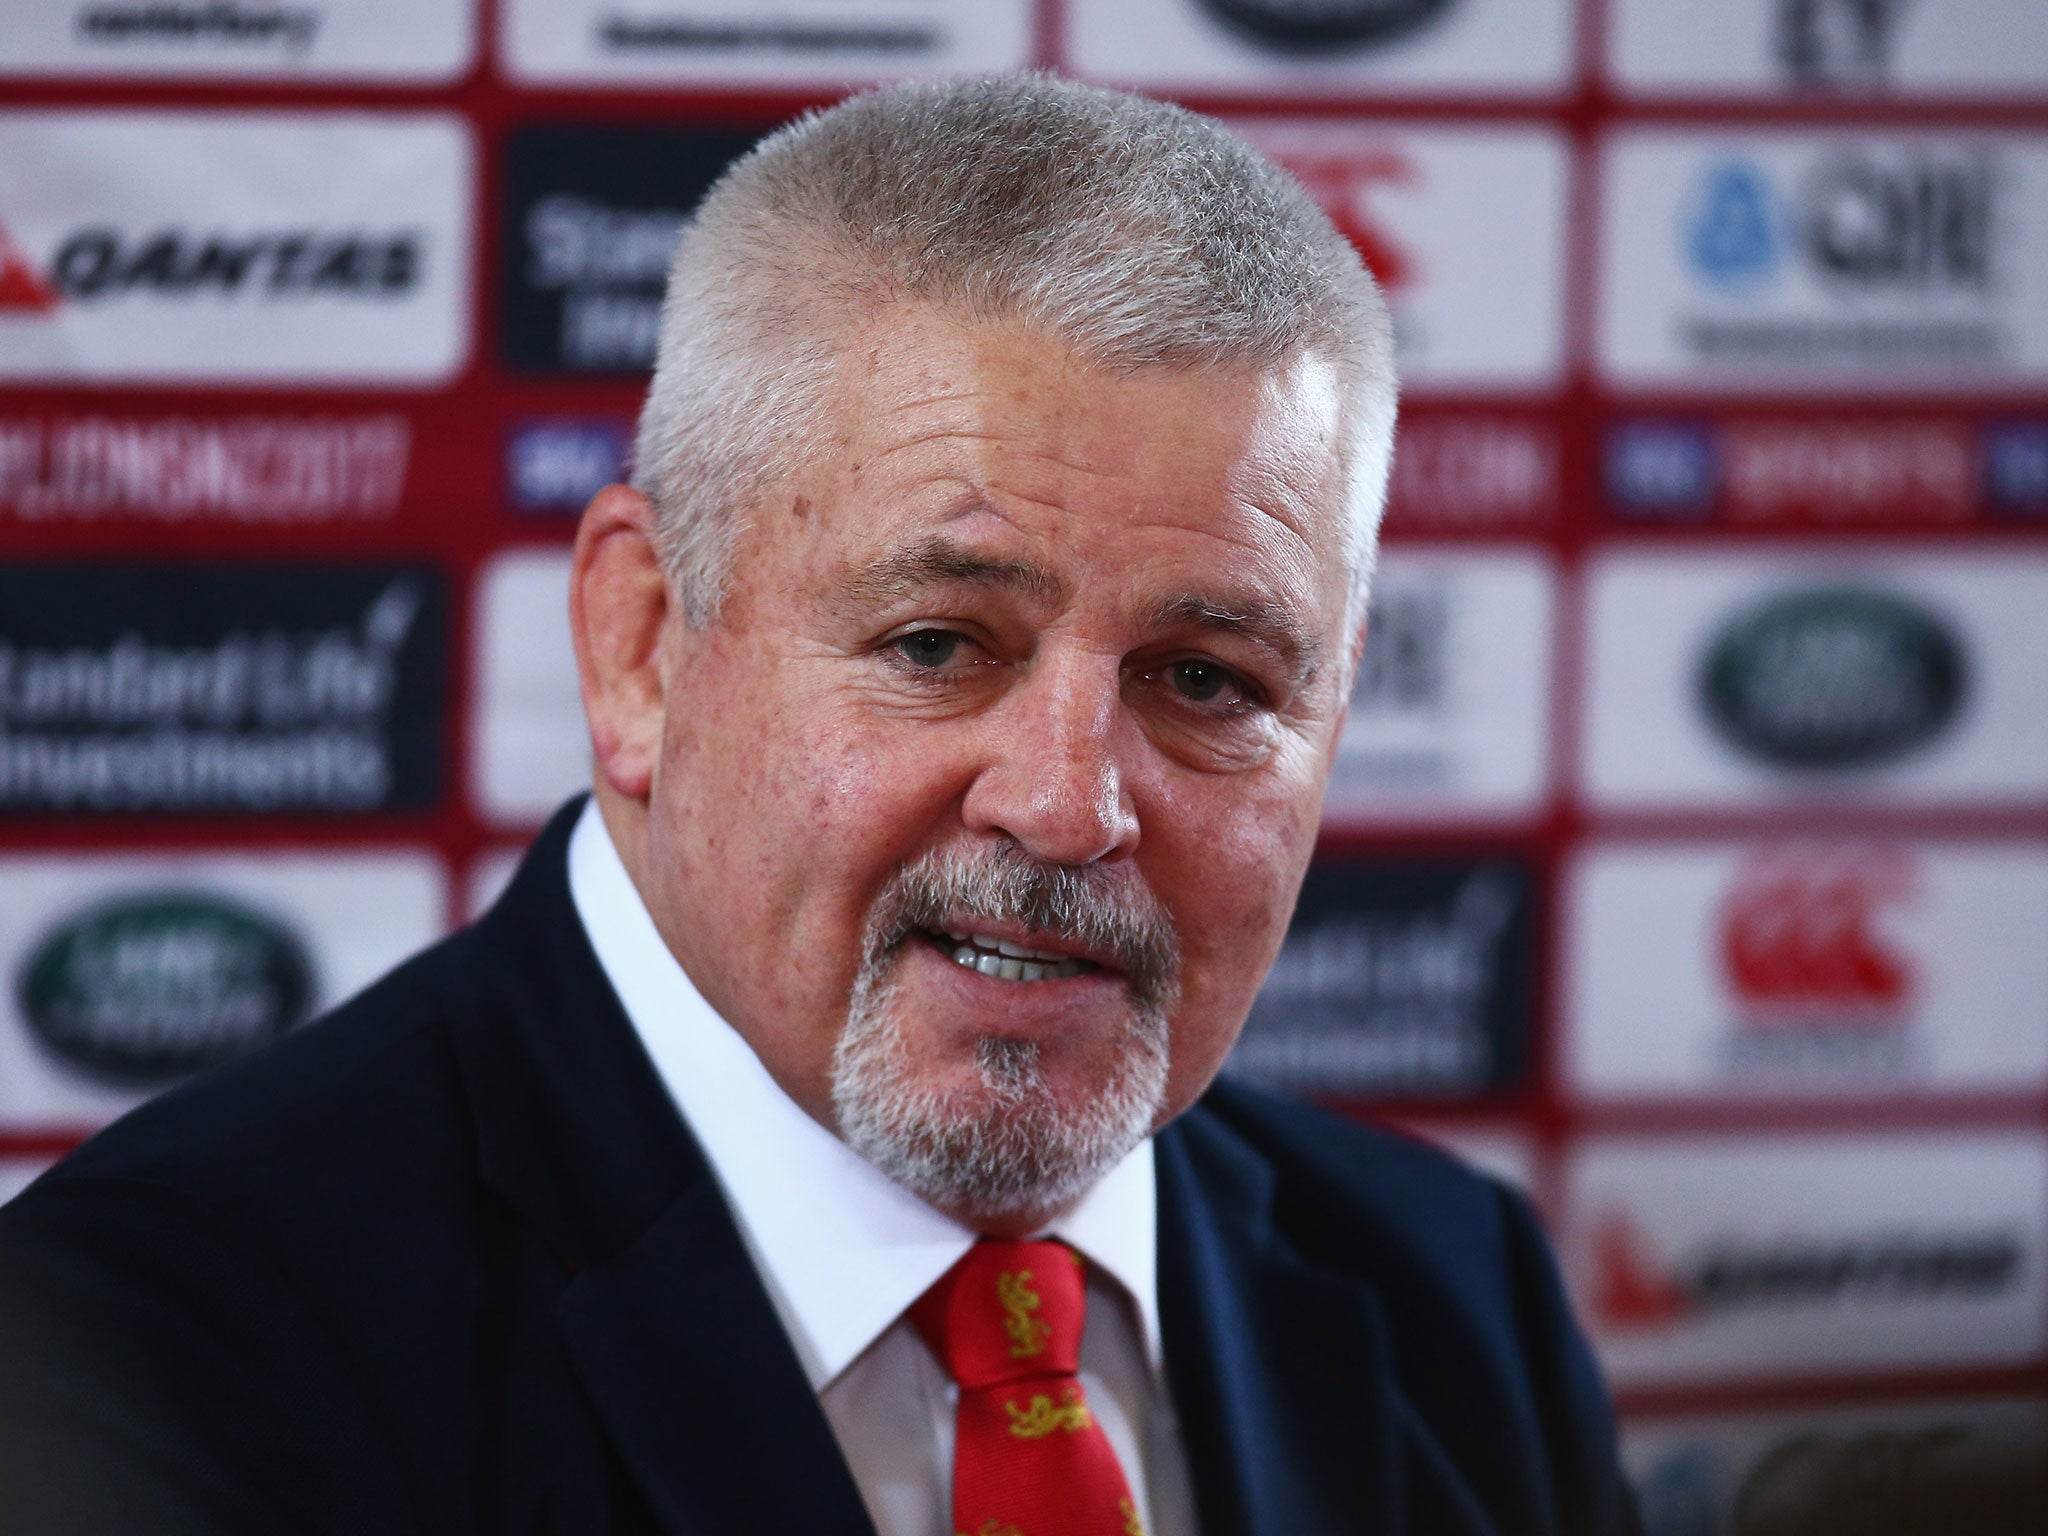 Warren Gatland defended his decision to have the Lions squad meet up the week of the Champions Cup final